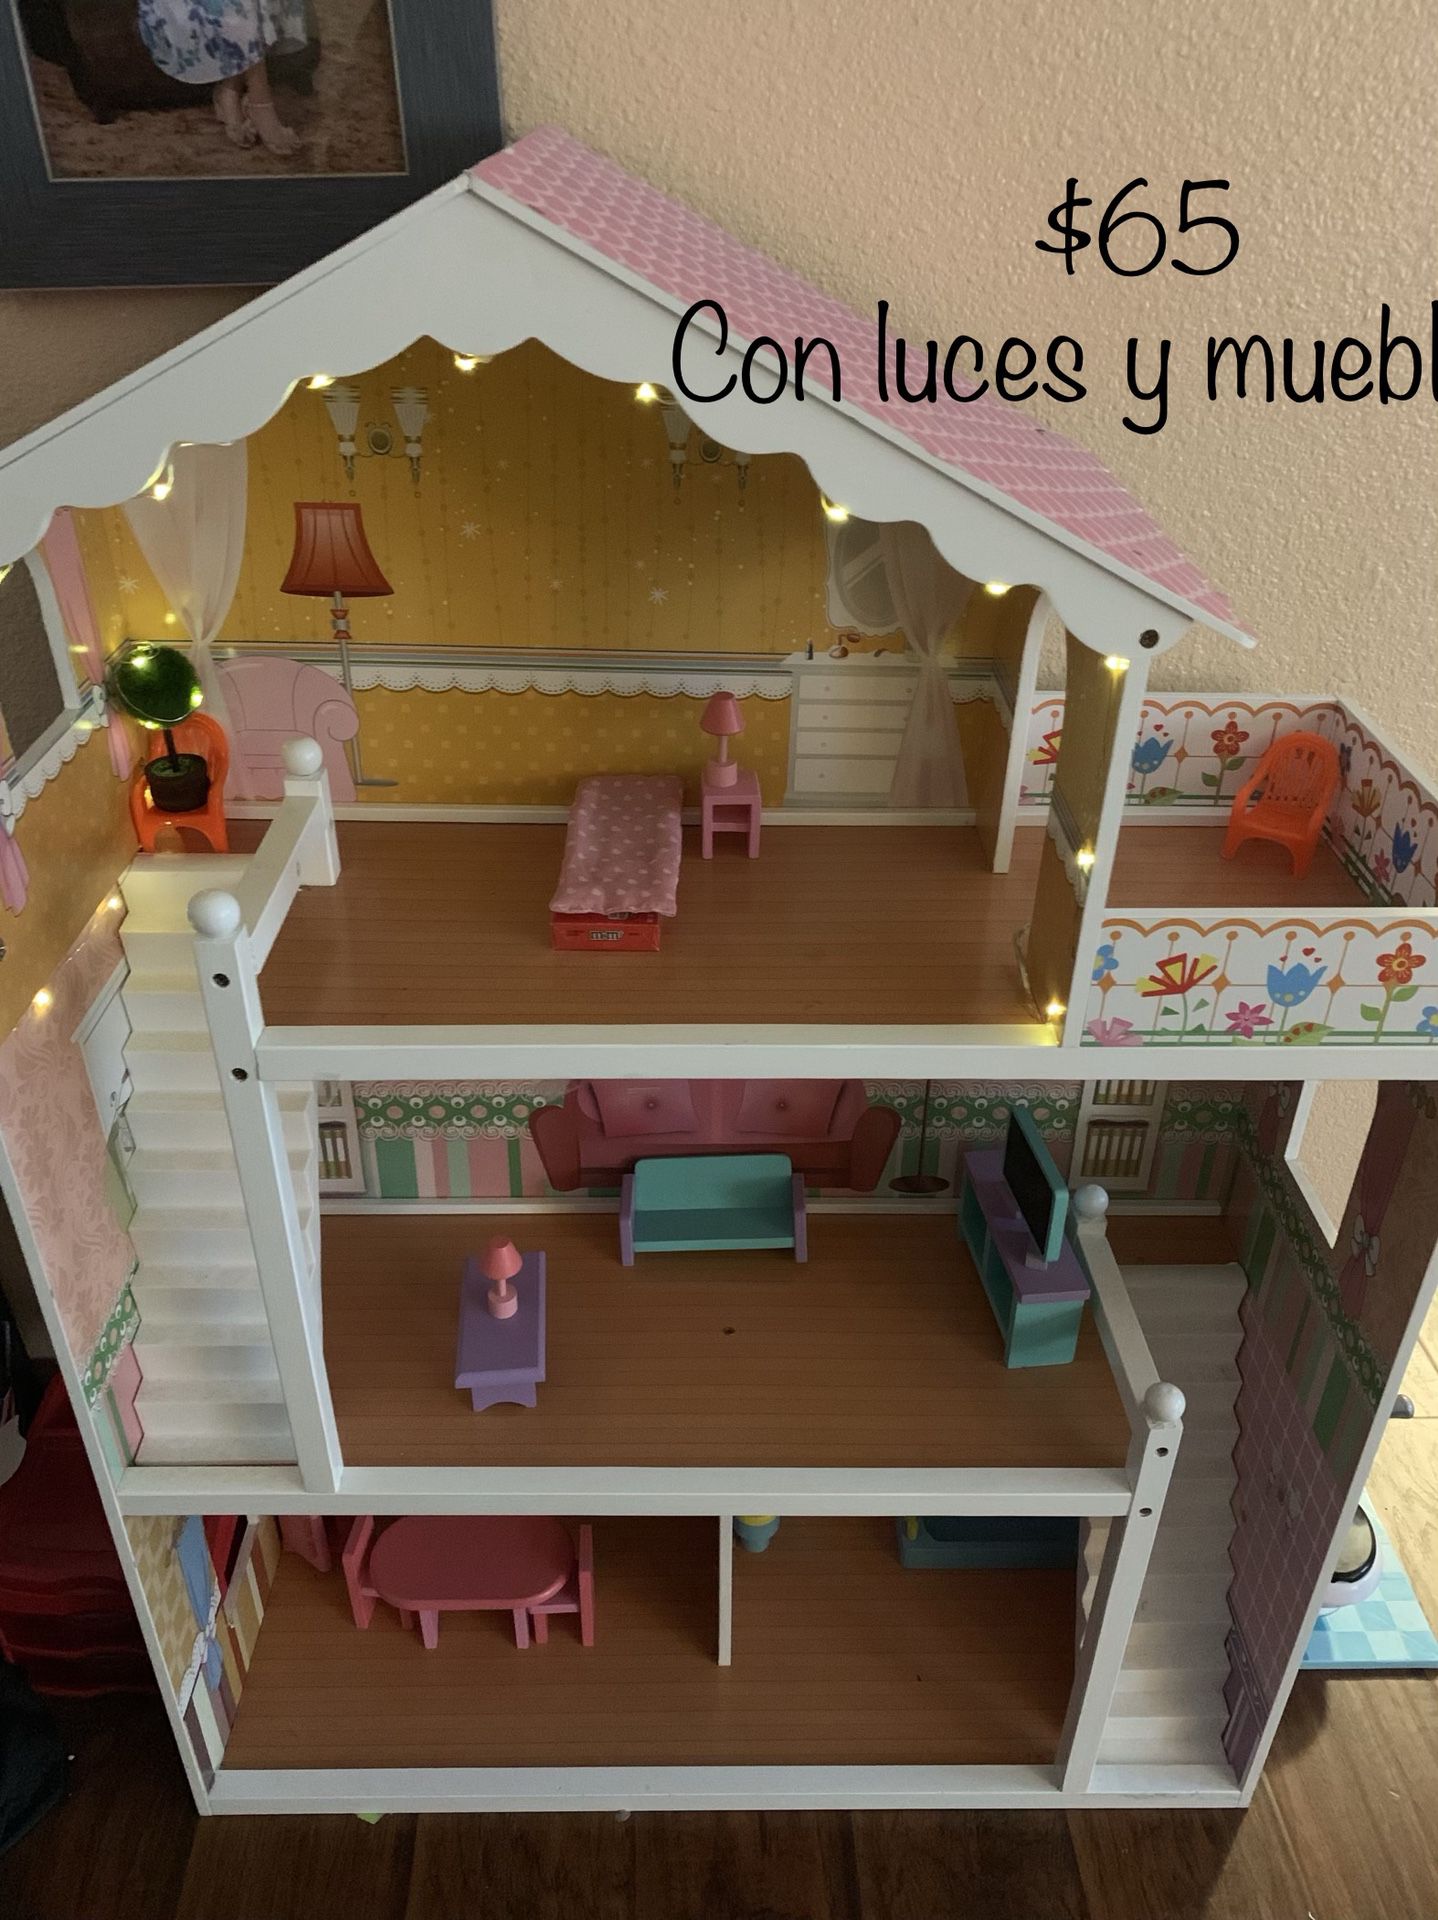 Large childrens wooden dollhouse